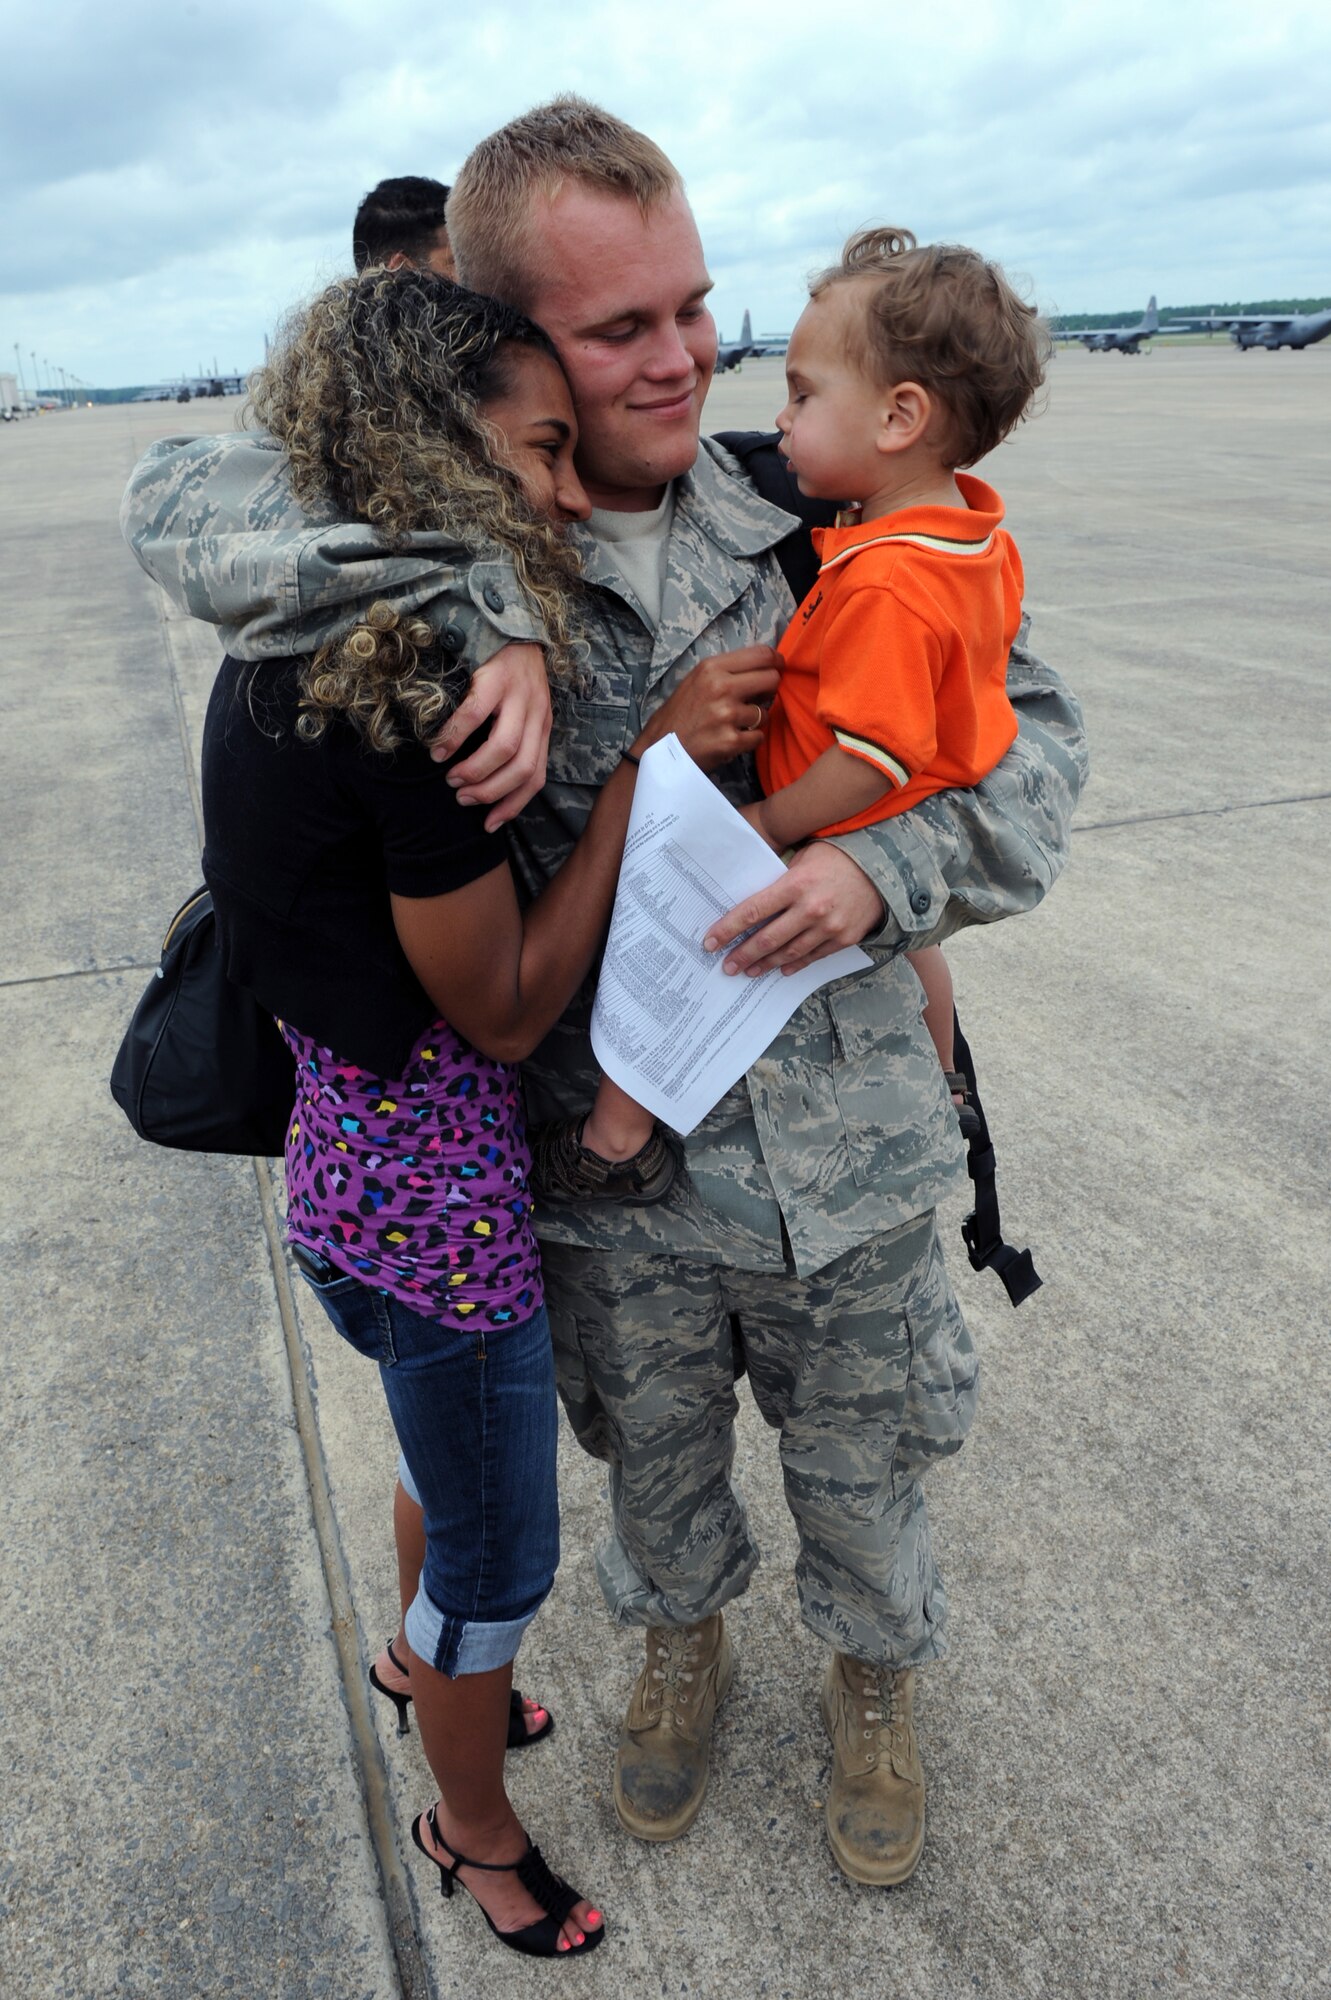 Senior Airman Brandon Rousseau is greeted by his family on the base flightline May 21, 2011, at Little Rock Air Force Base, Ark. Airman Rousseau was one of the nearly 200 Team Little Rock Airmen supporting operations in Southwest Asia. (U.S. Air Force Photo by Airman 1st Class Rusty Frank)